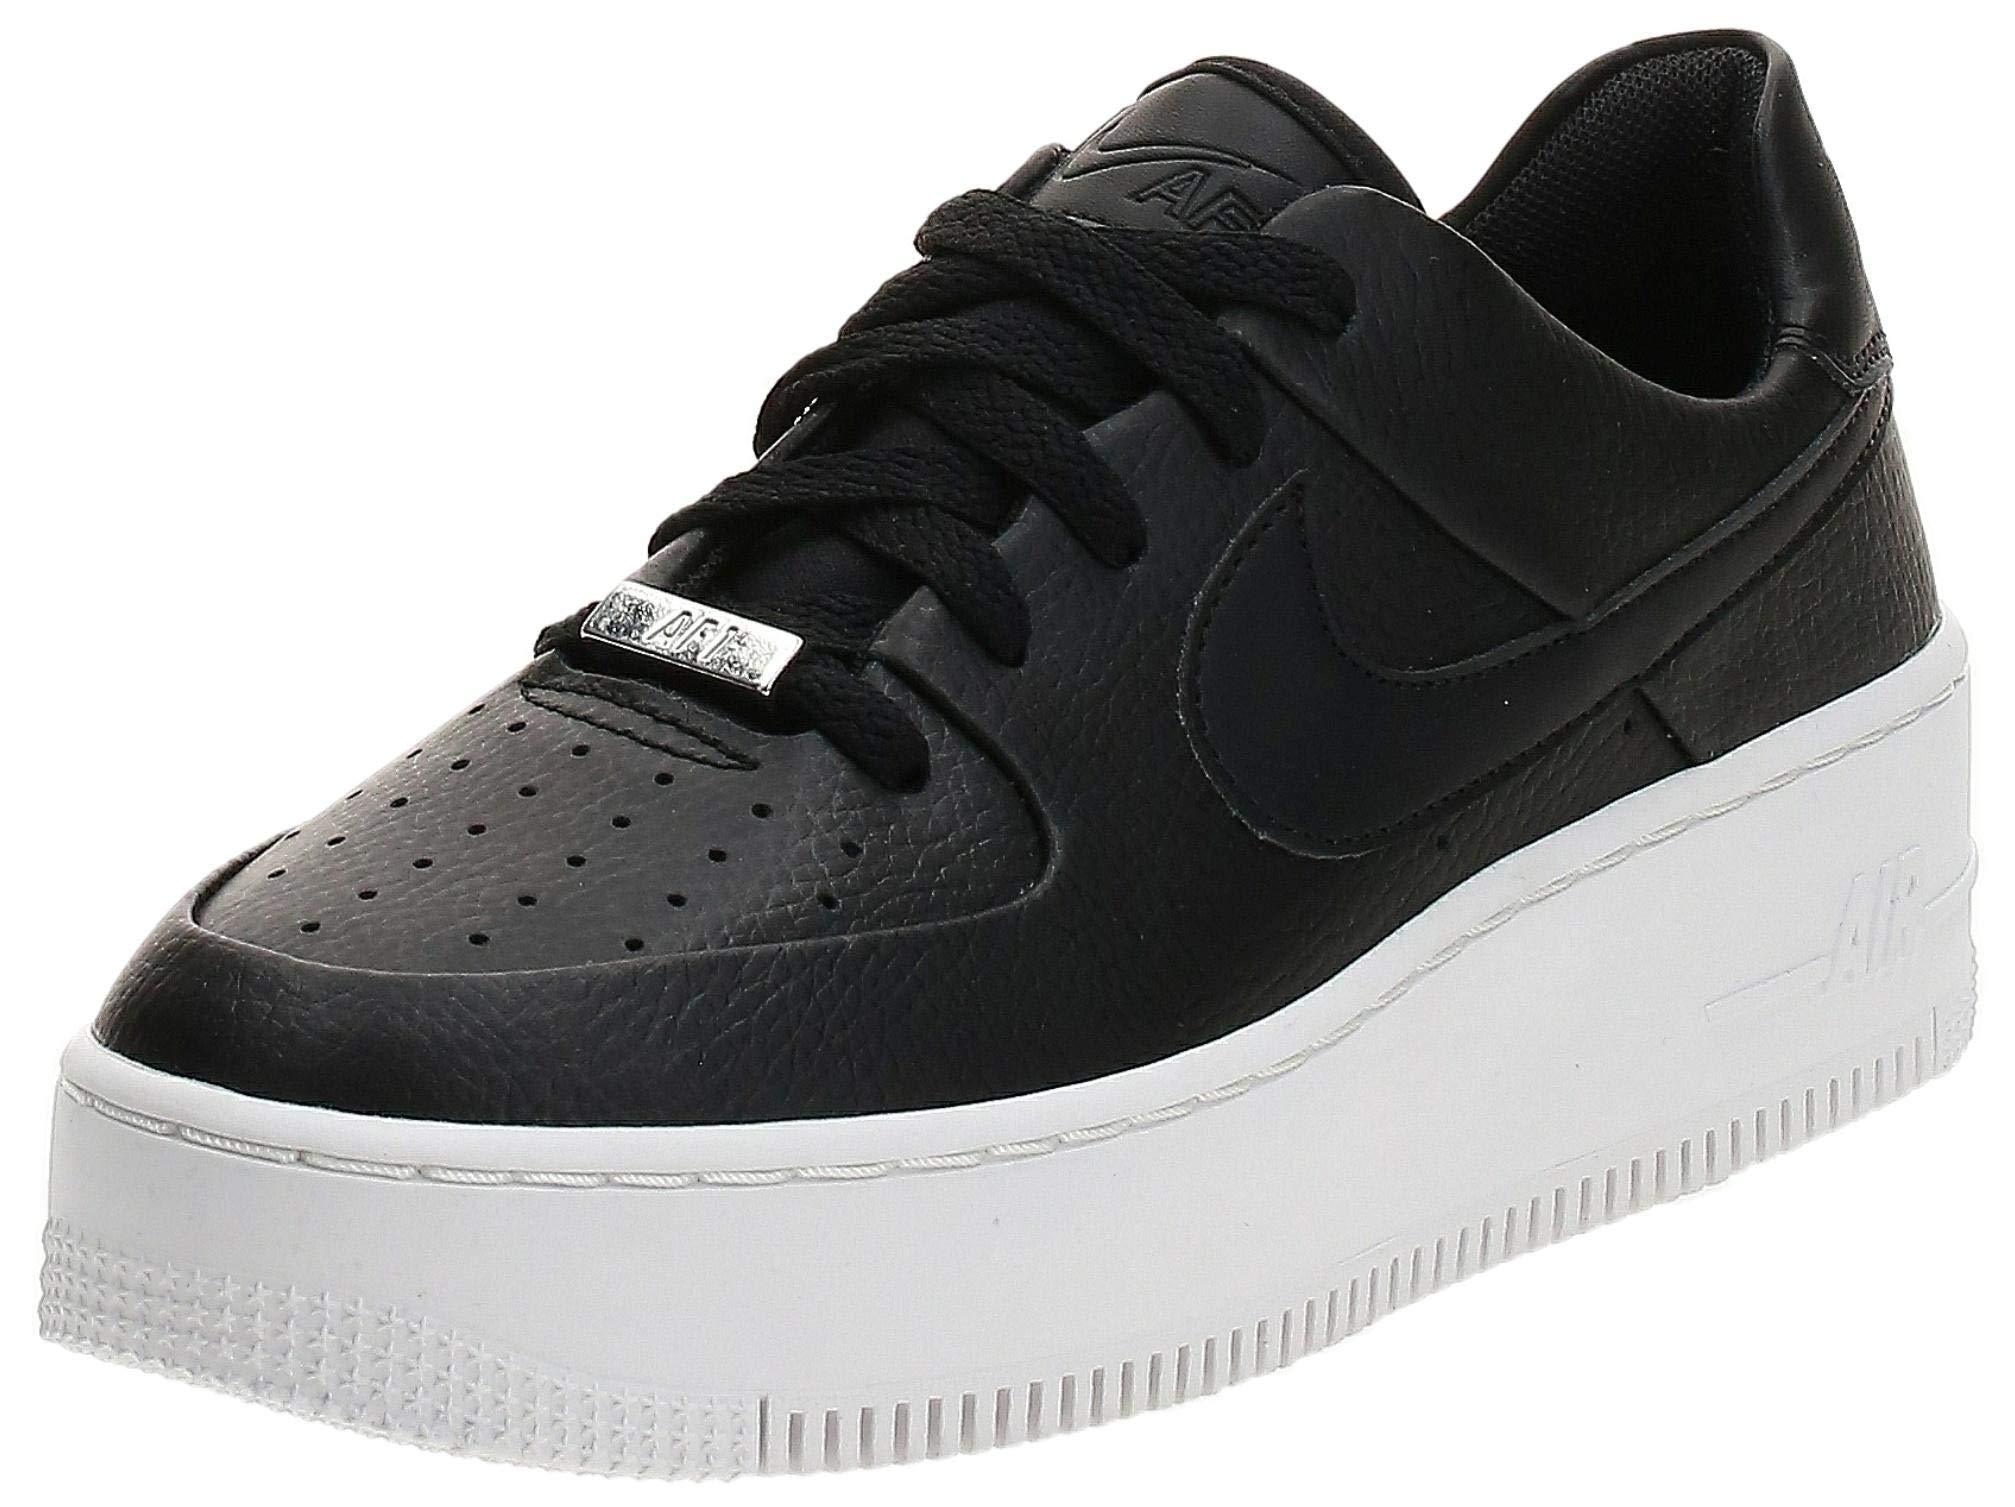 Nike Leather Air Force 1 Sage Low Basketball Shoes in Black - Lyst